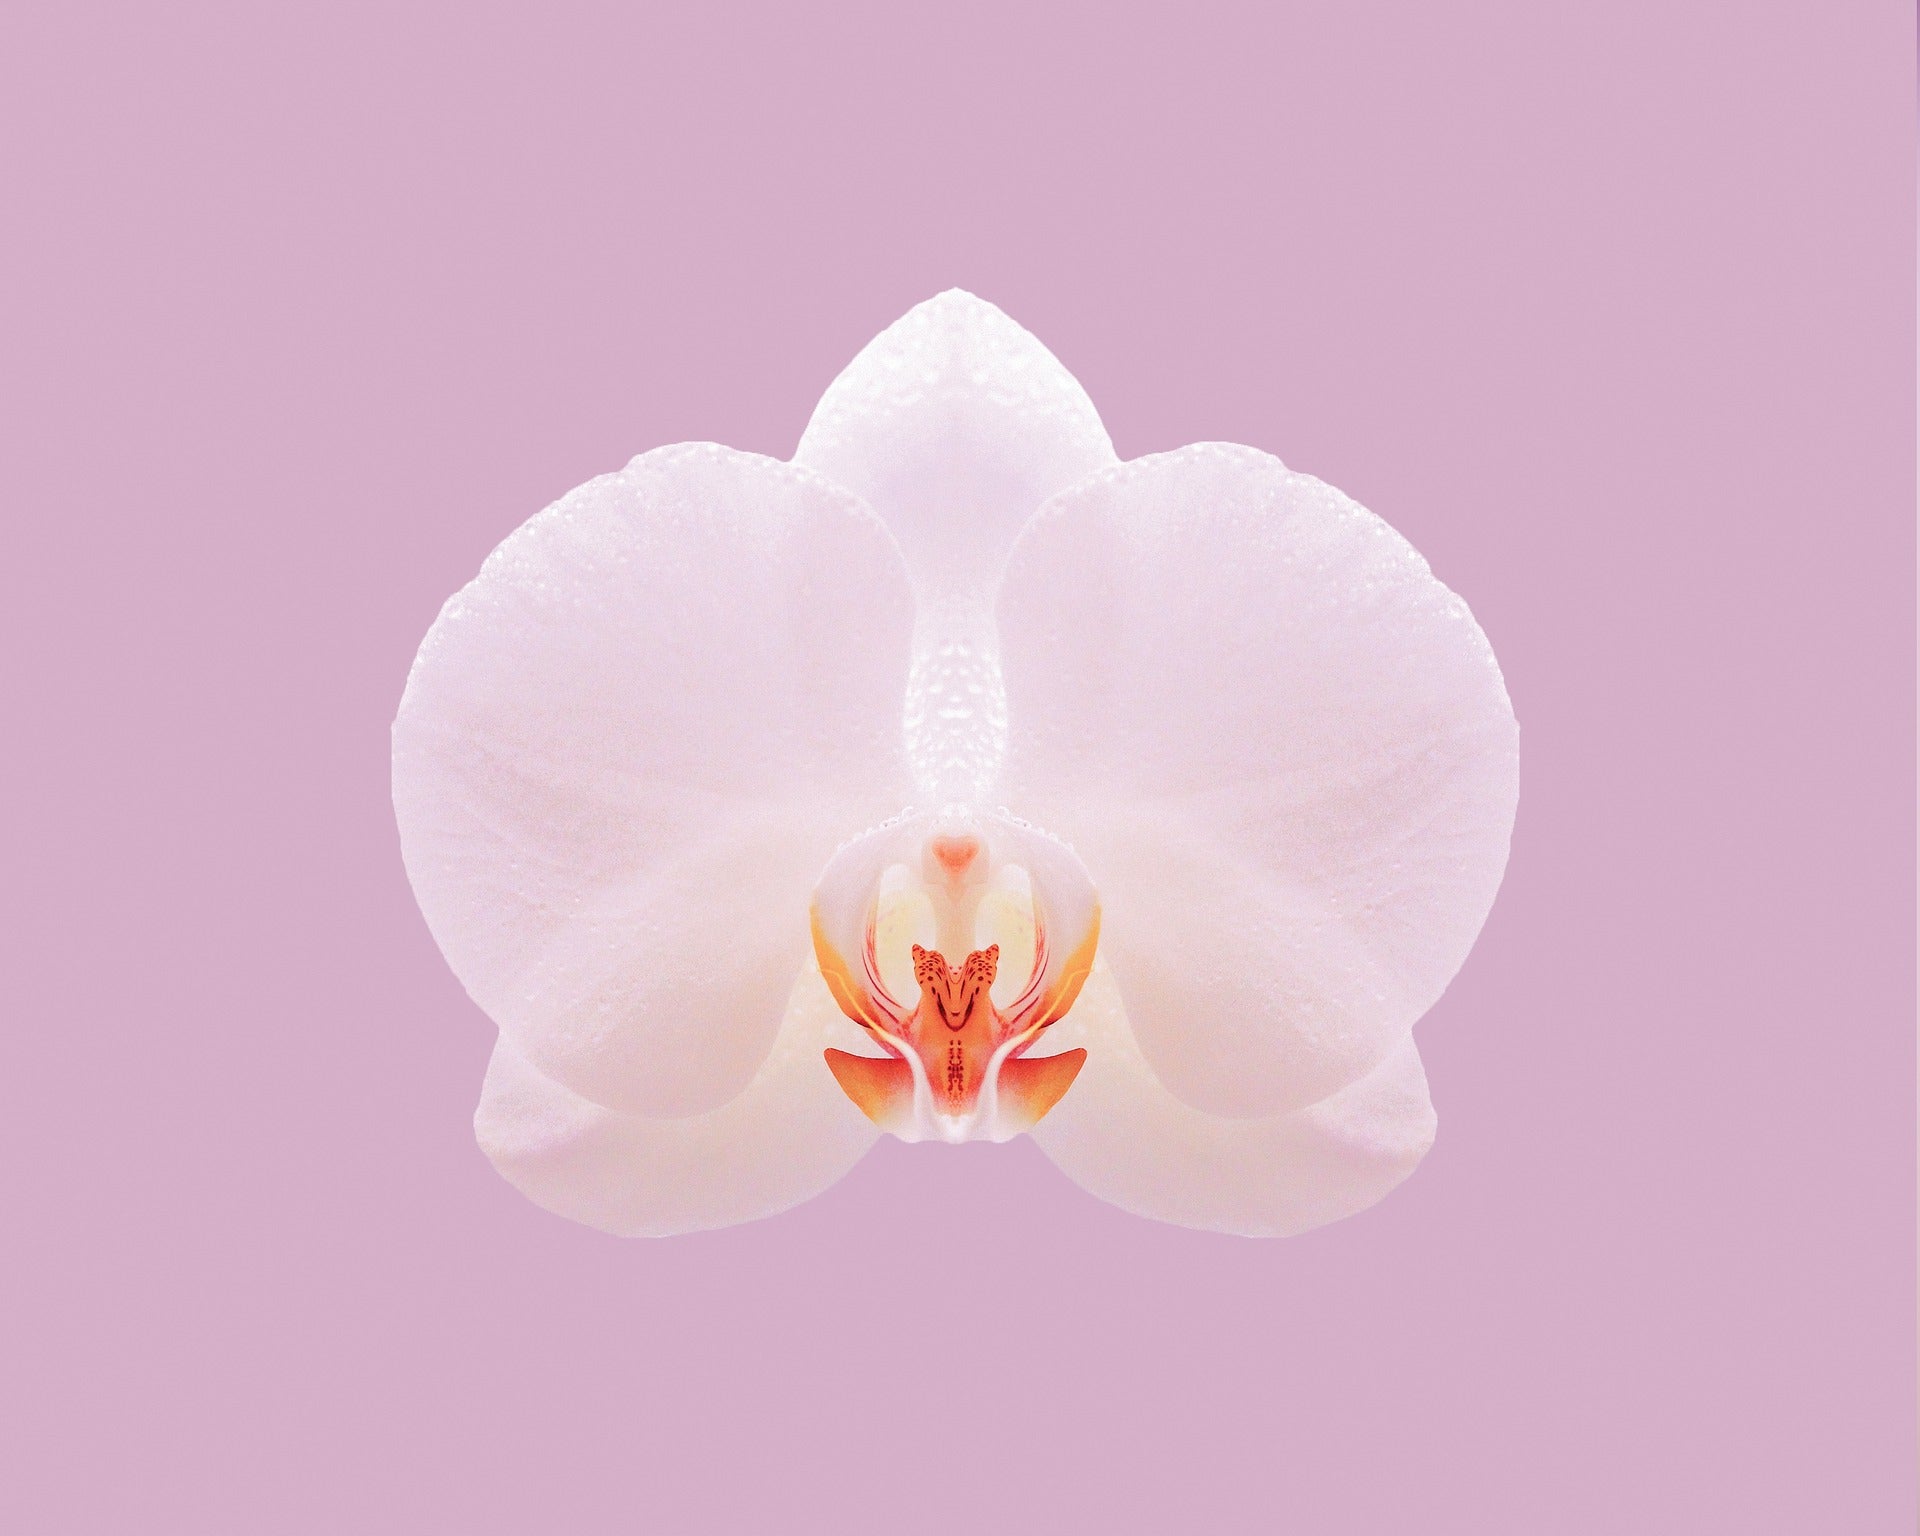 Do Orchids have an Aroma?